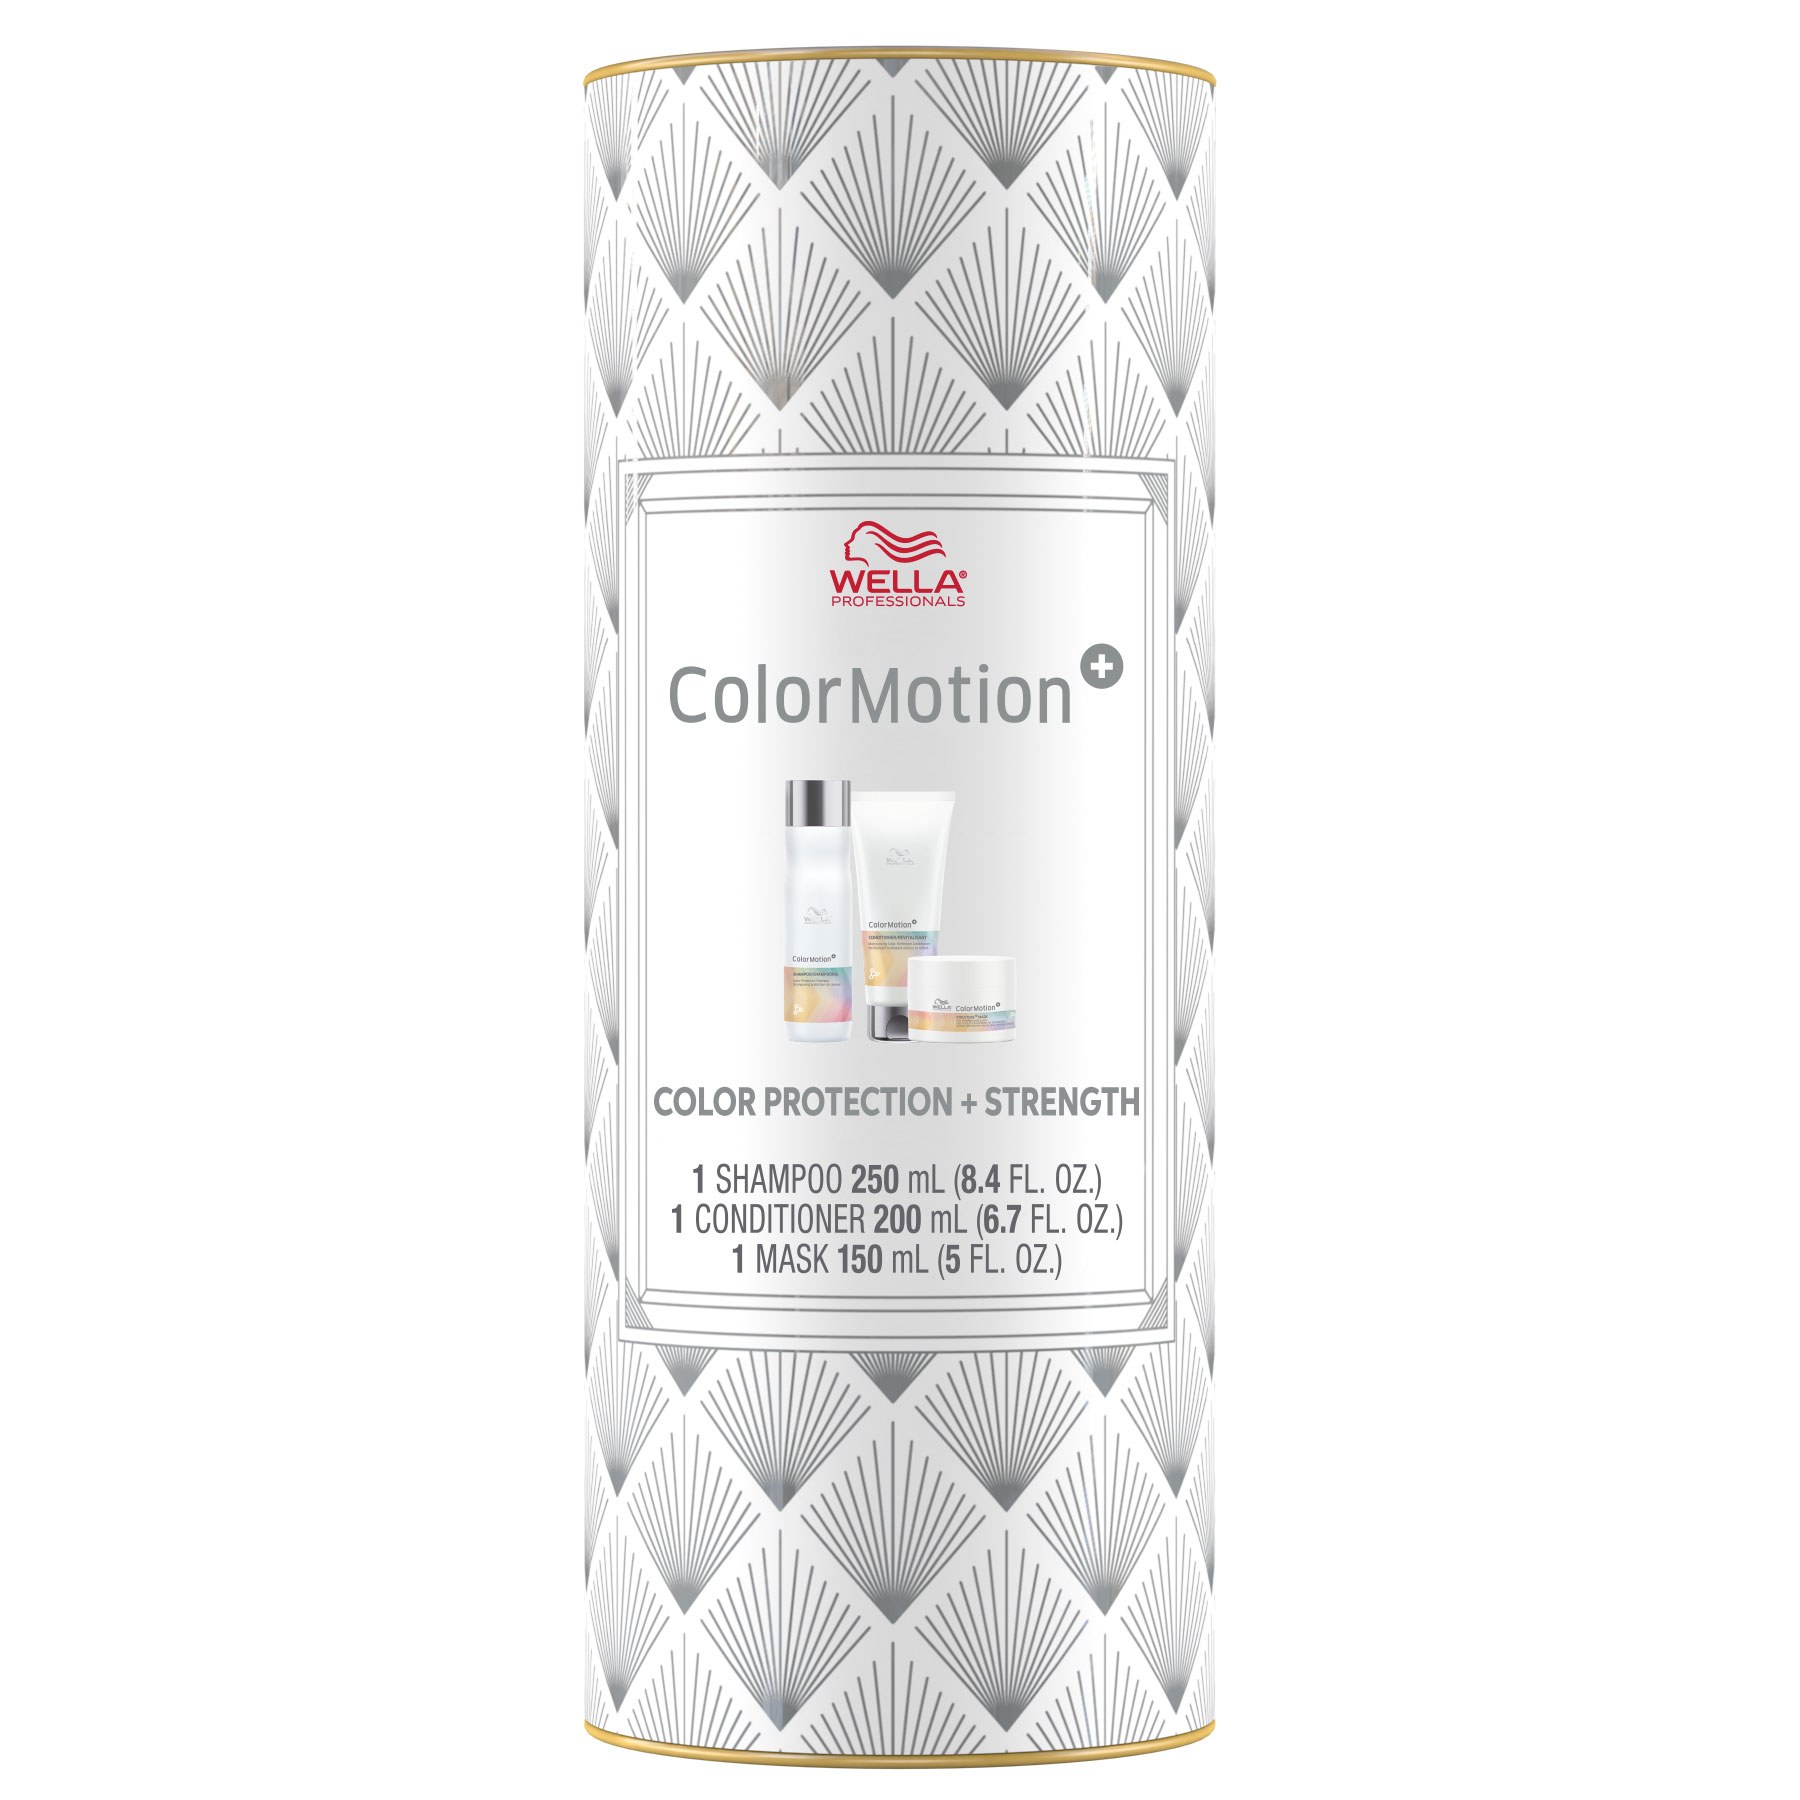 Wella ColorMotion+ Holiday 3pk